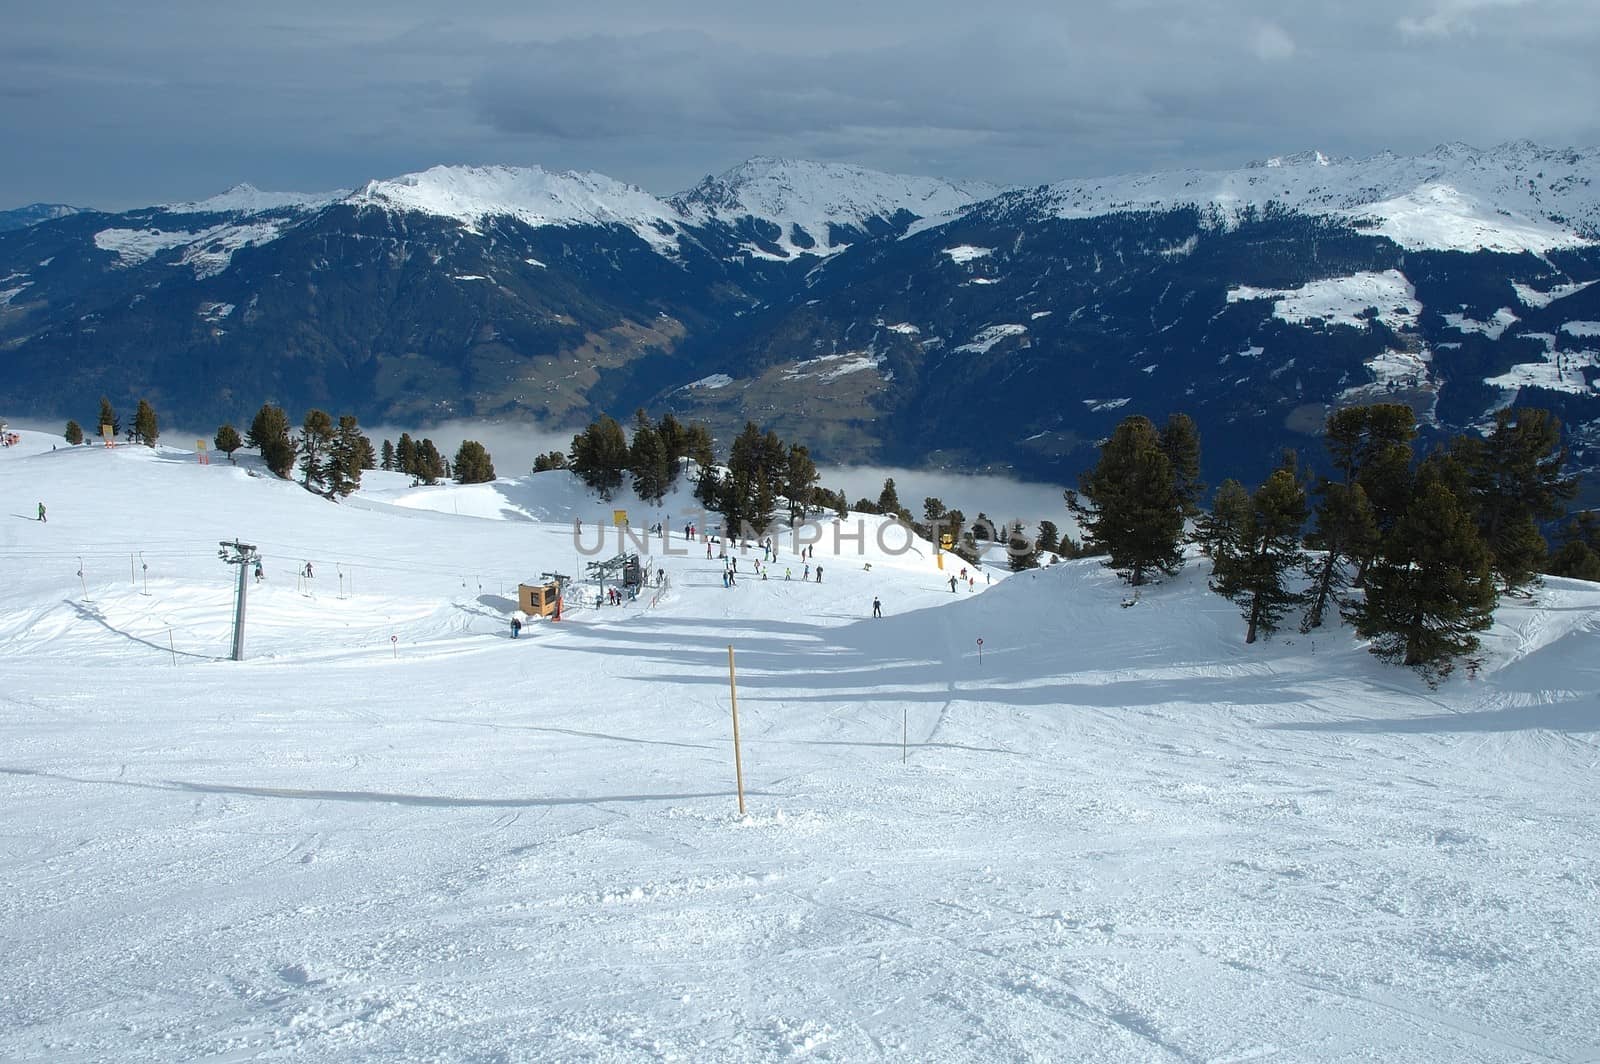 Ski slope, skiers and lift in Austria nearby Kaltenbach in Zillertal valley